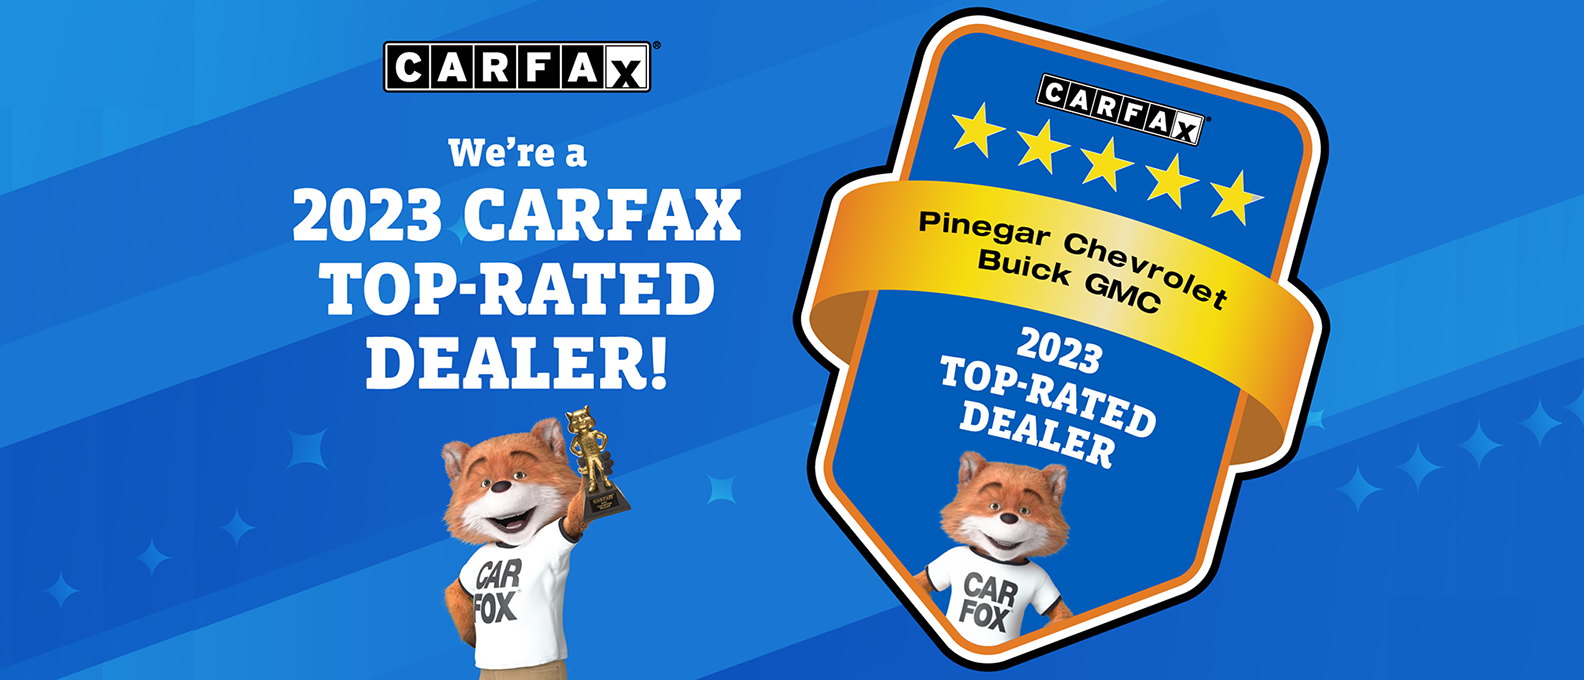 Carfax Dealer of the Year 2023